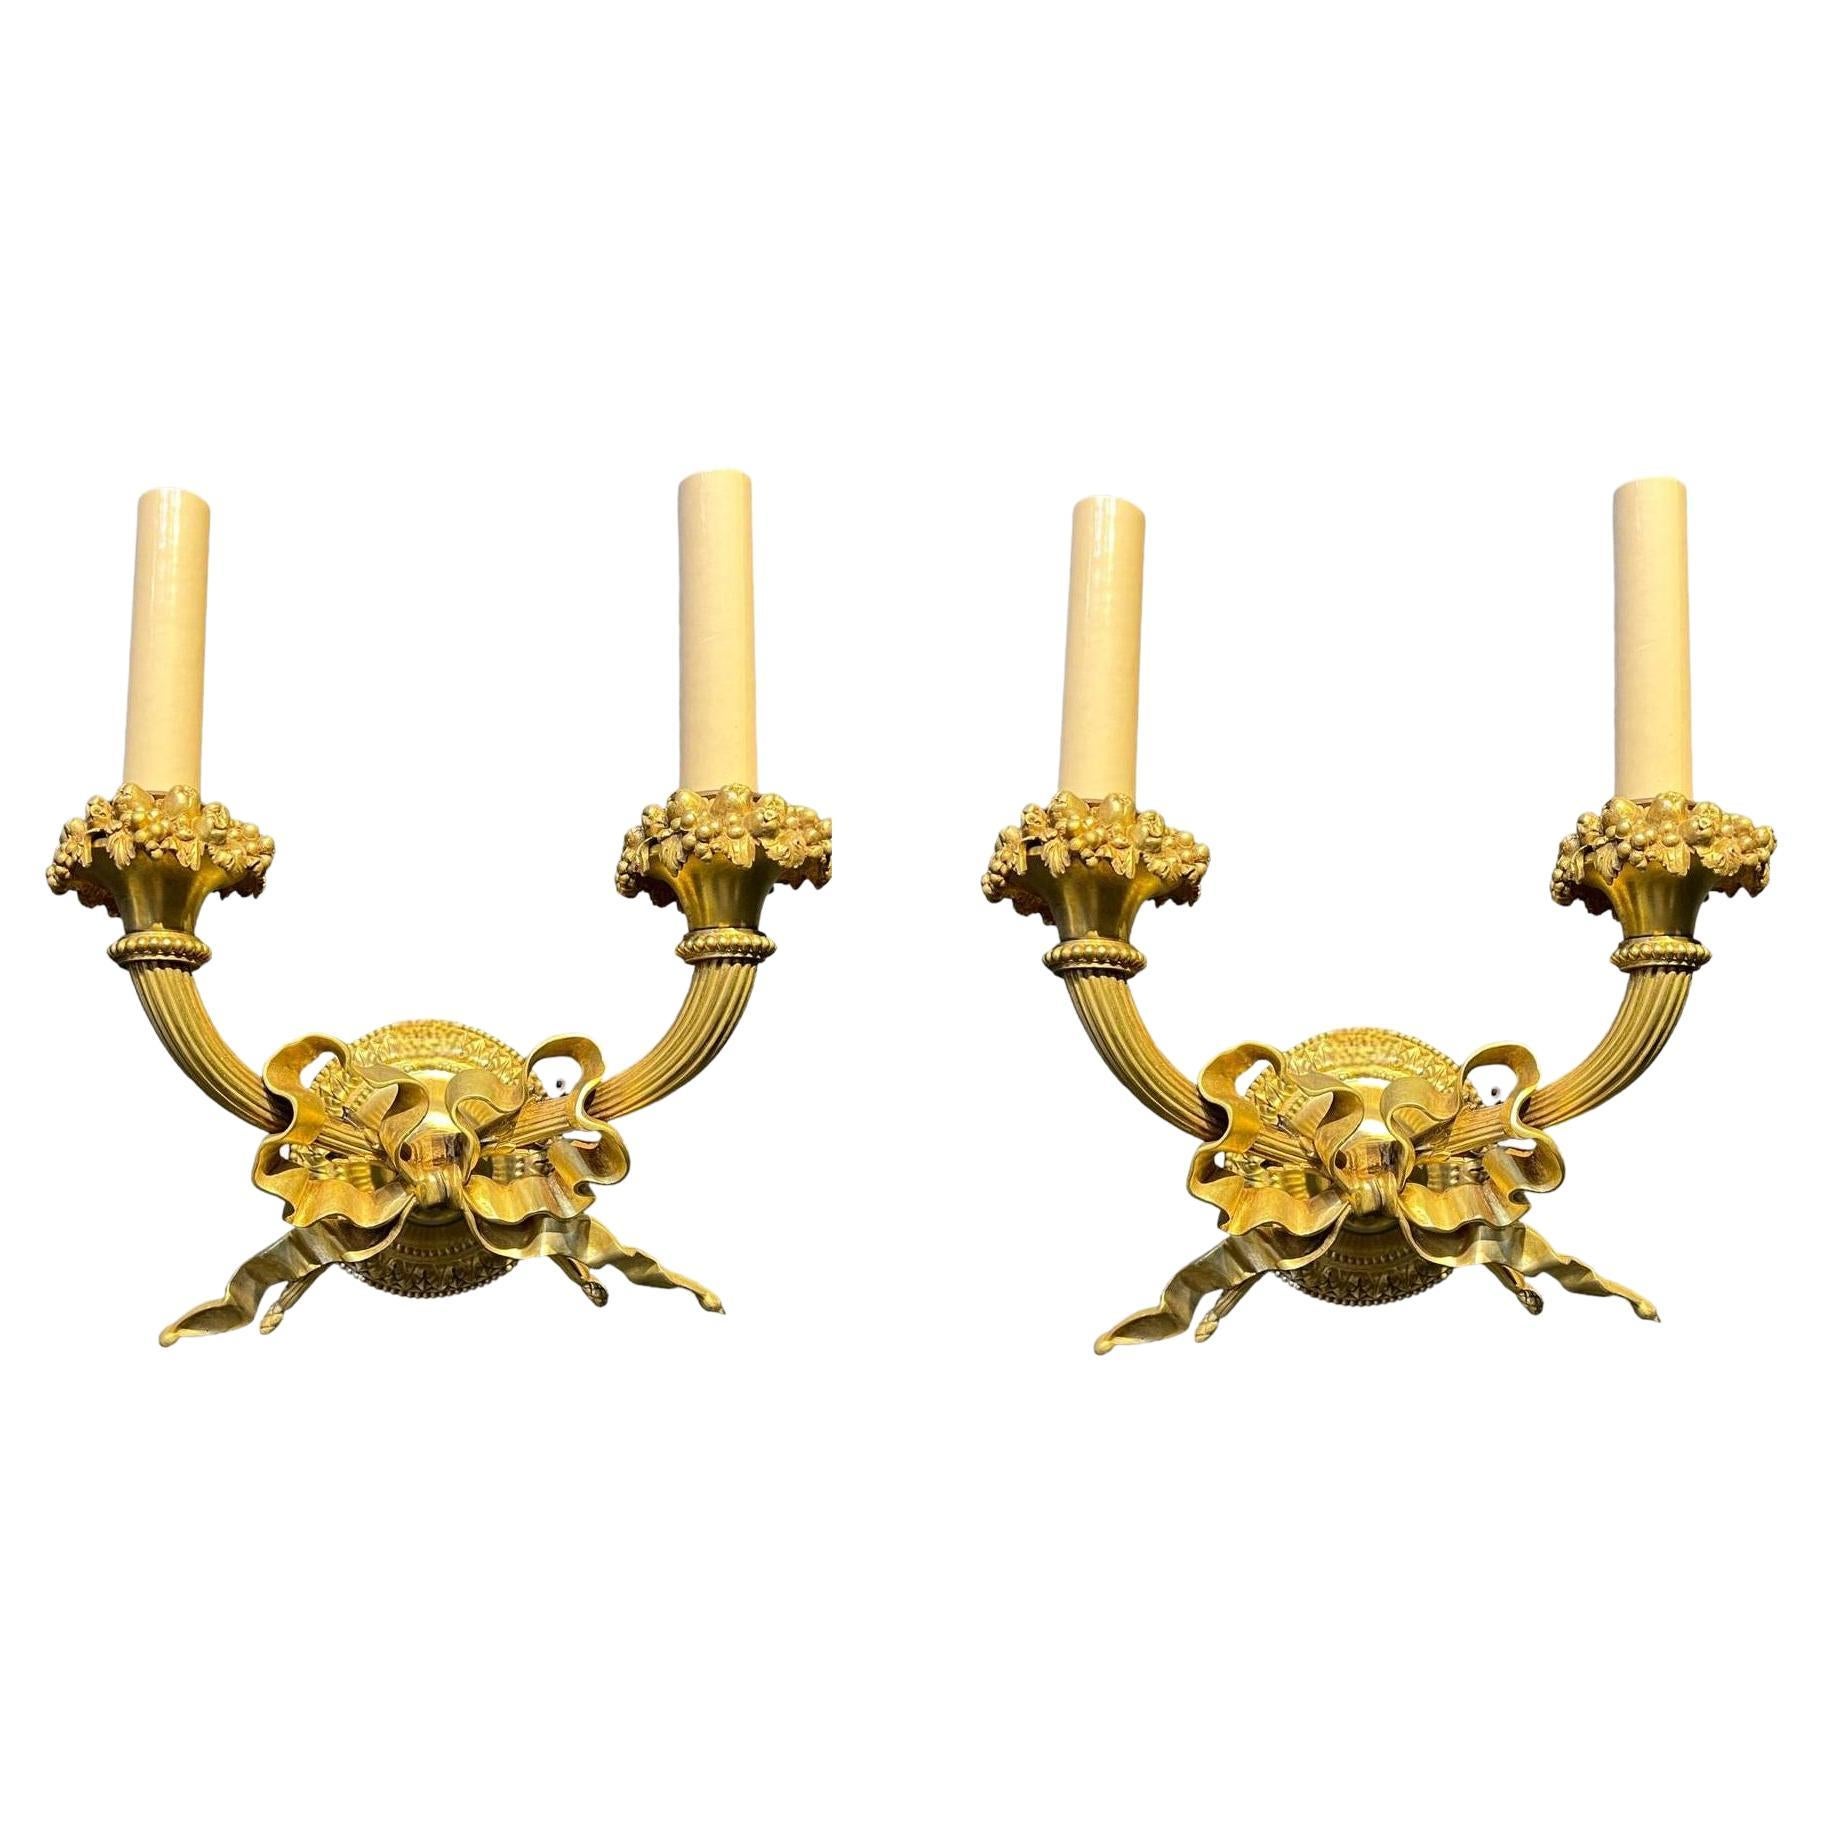 Pair of 1920's Caldwell Gilt Bronze Sconces with Ribbon